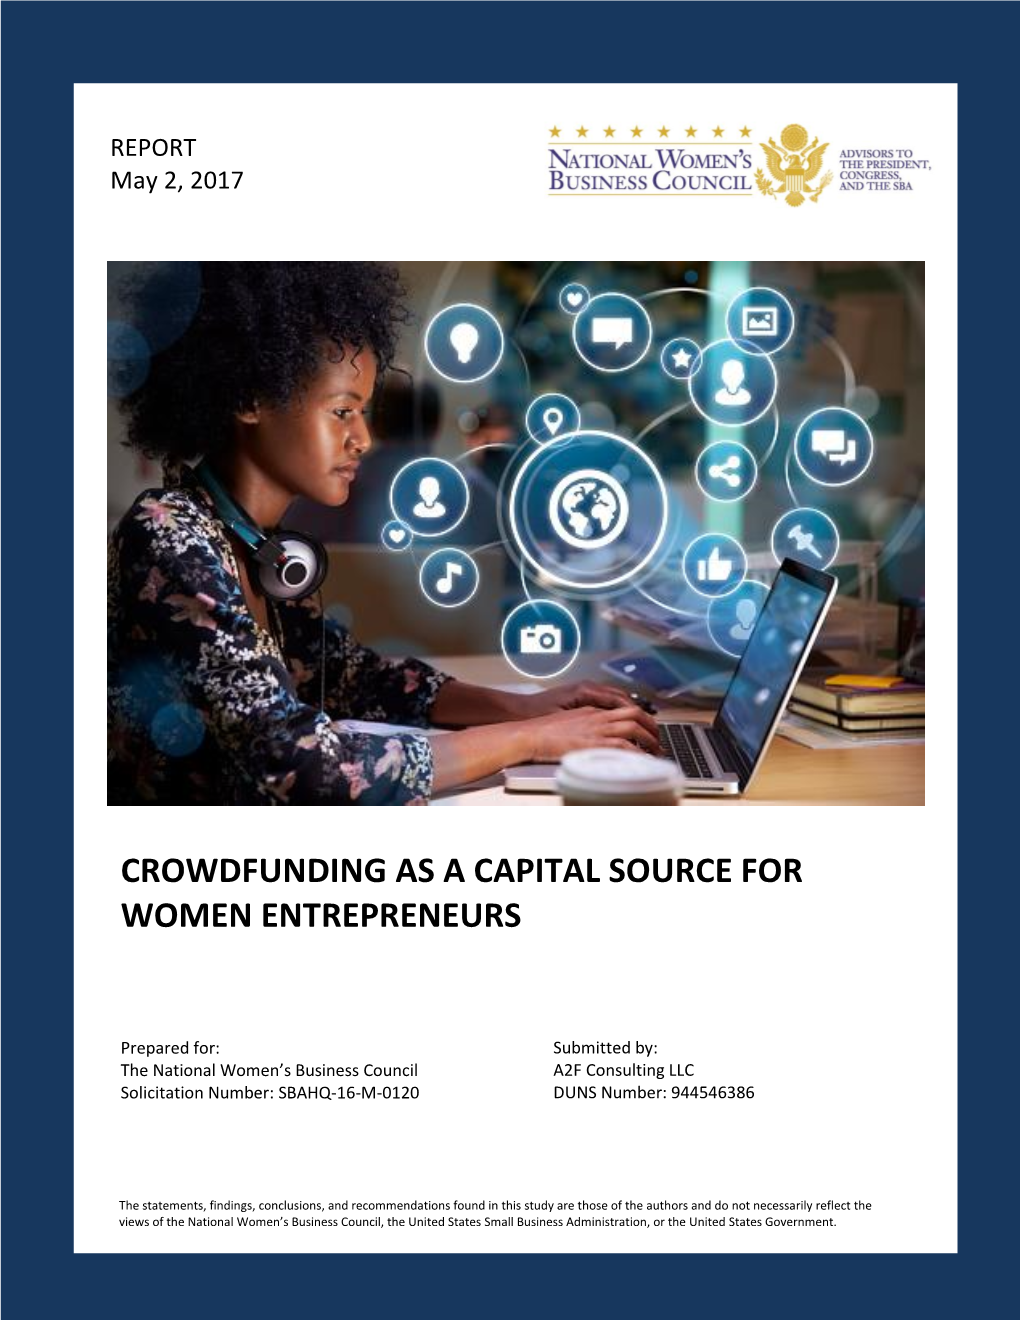 Crowdfunding As a Capital Source for Women Entrepreneurs